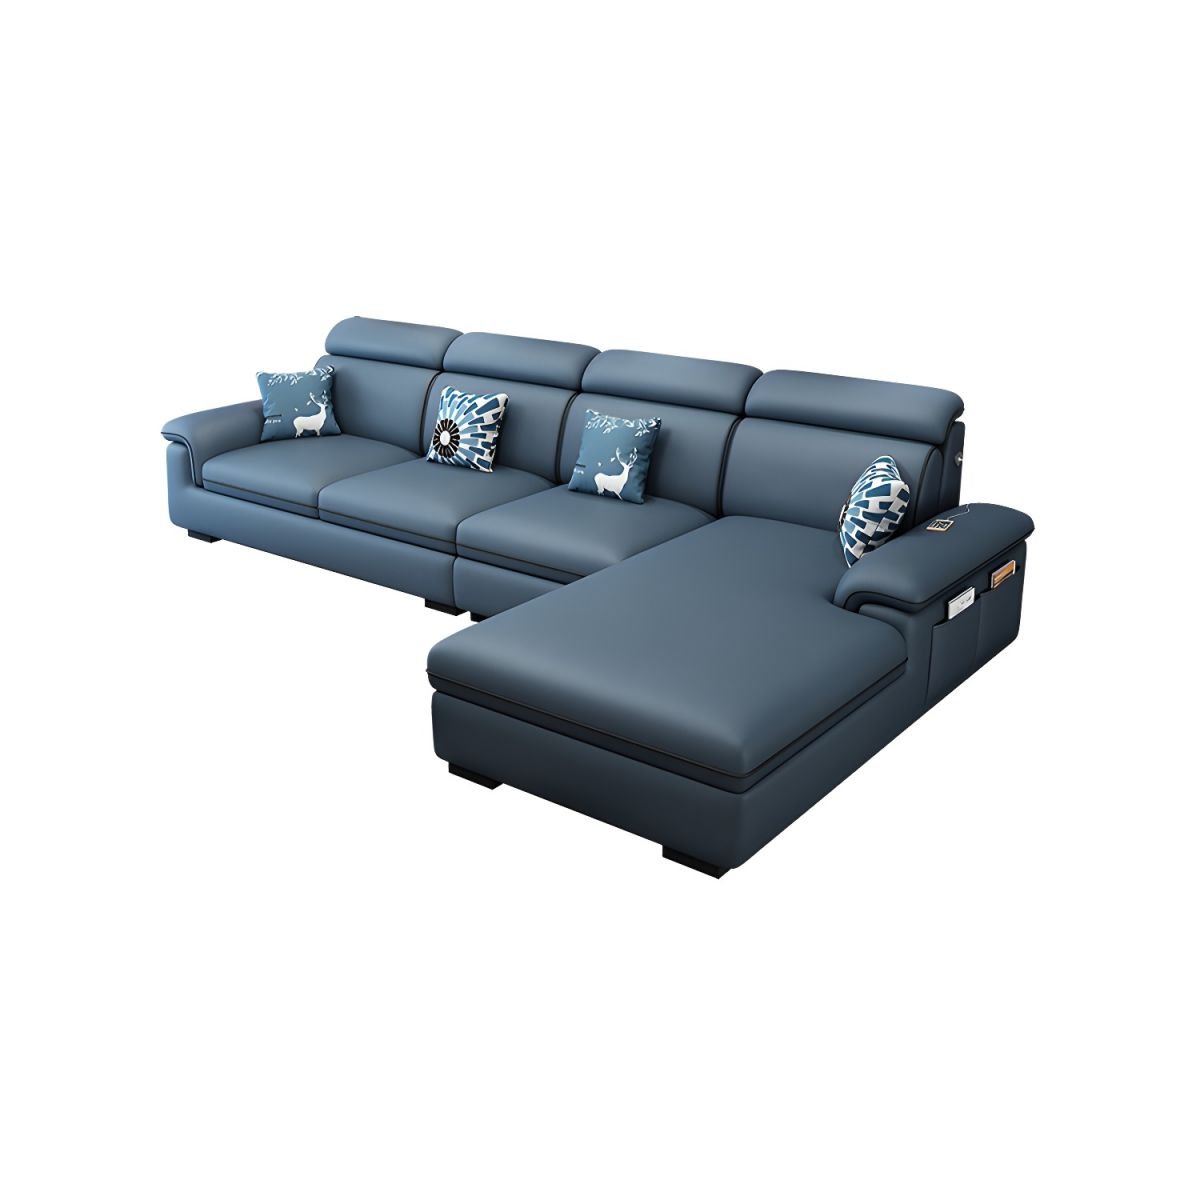 Wooden Modern 9 Feet L-Shape Sectionals No Distressing Seats 4 Storage Included Sofa Chaise - Tech Cloth Dark Blue Right